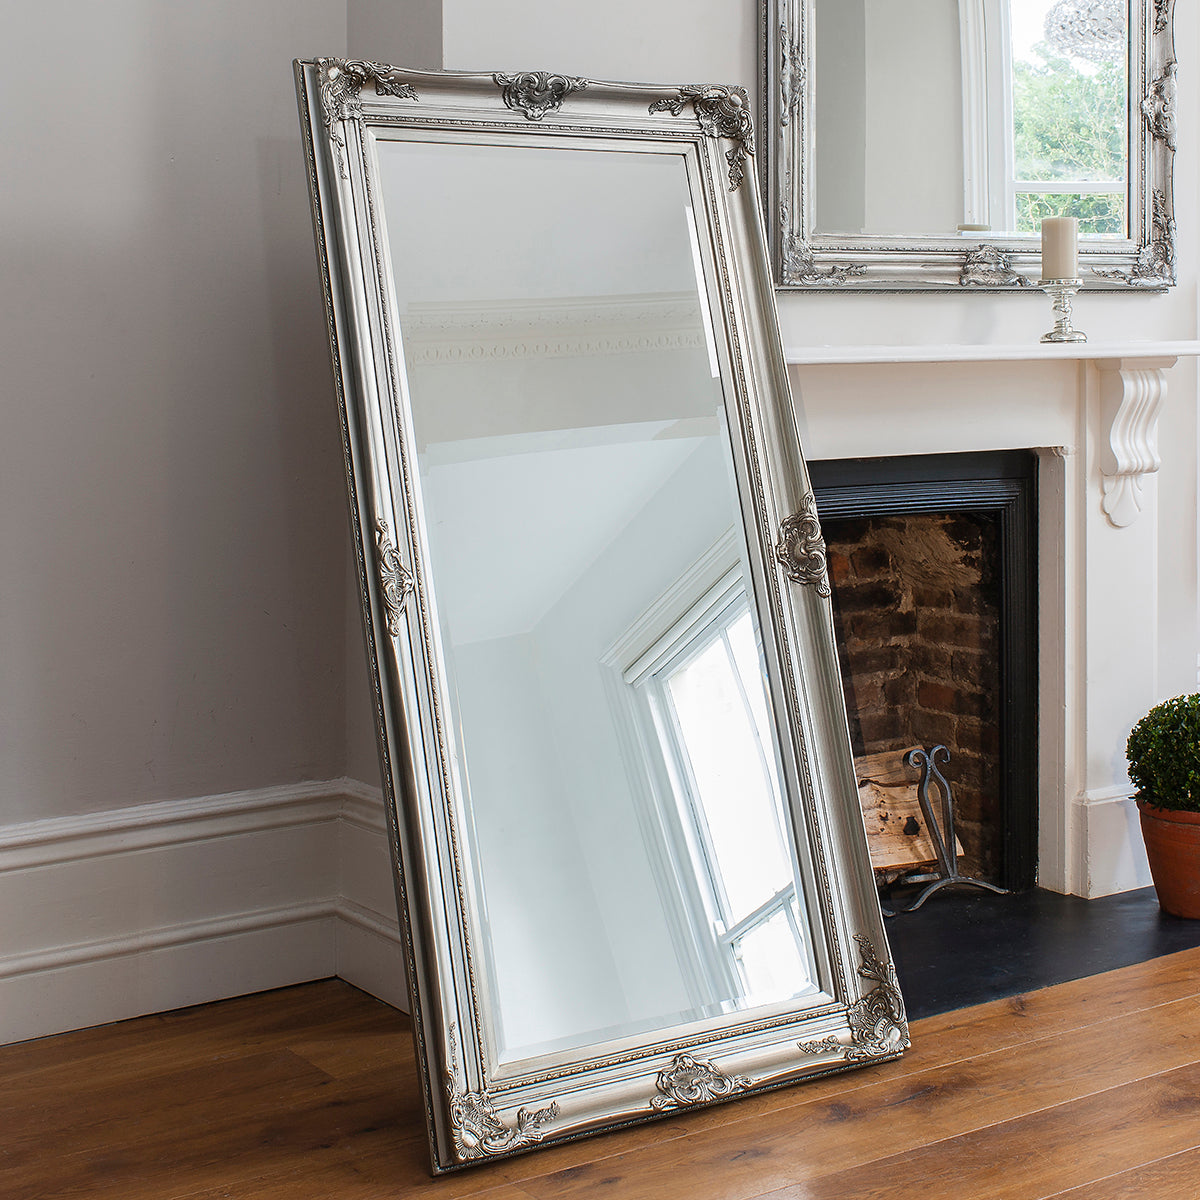 Harlow Leaner Mirror Antique Silver